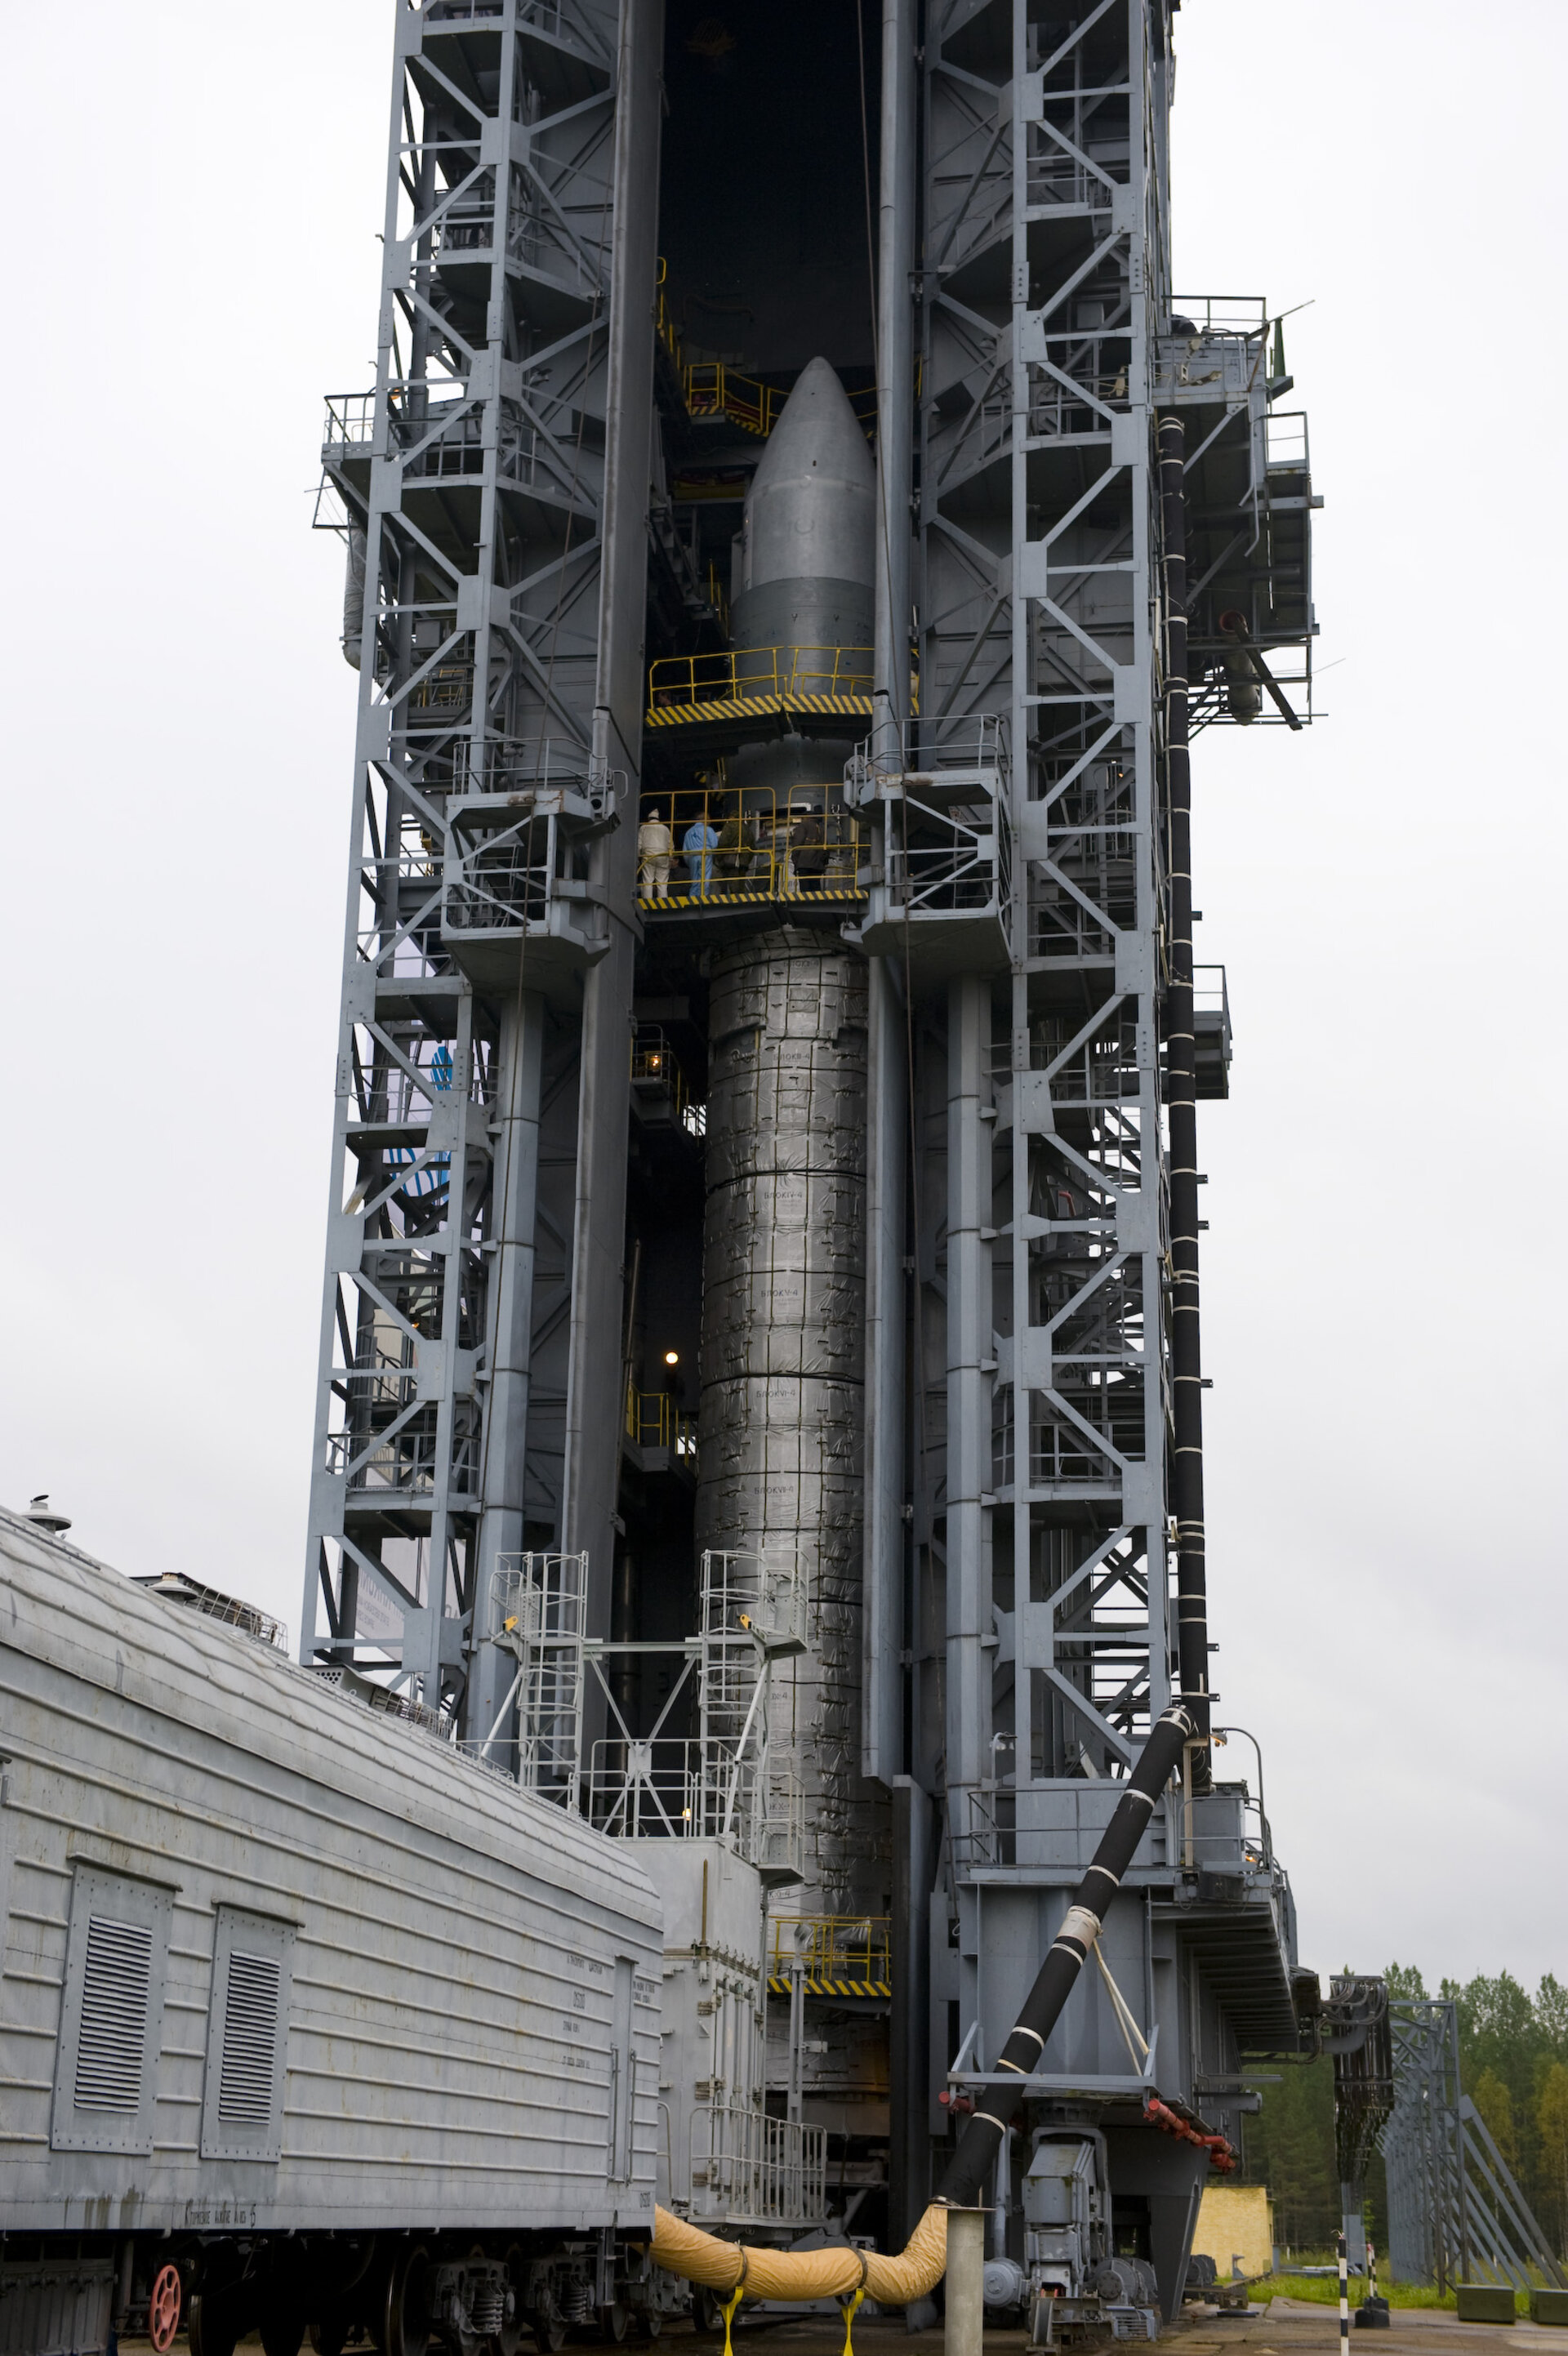 GOCE on the launch pad